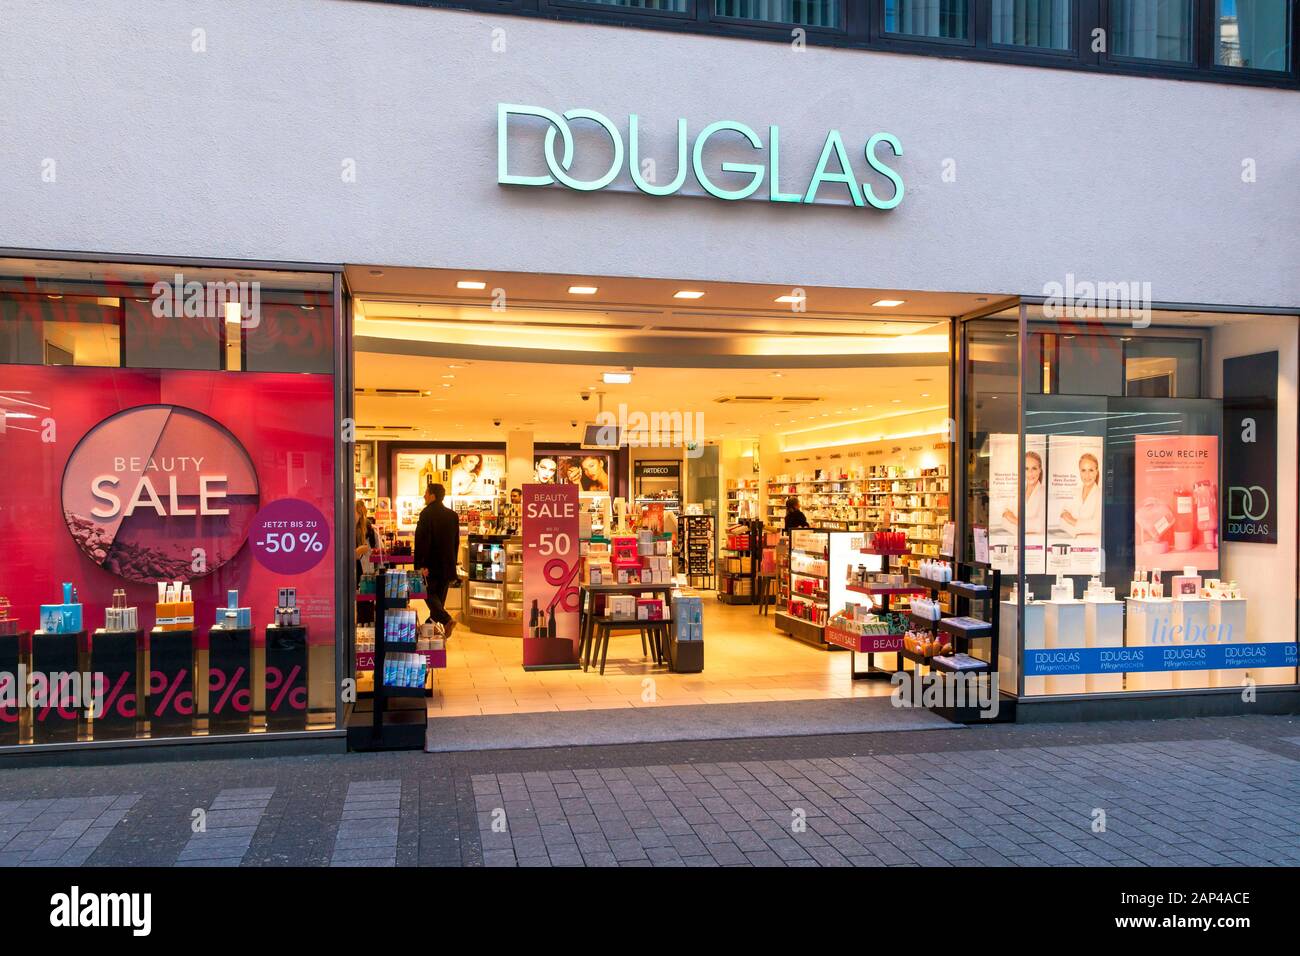 the perfumery Douglas on the shopping street Hohe Strasse, Cologne, Germany.  die Parfuemerie Douglas auf der Einkaufsstrasse Hohe Strasse, Koeln, Deu Stock Photo